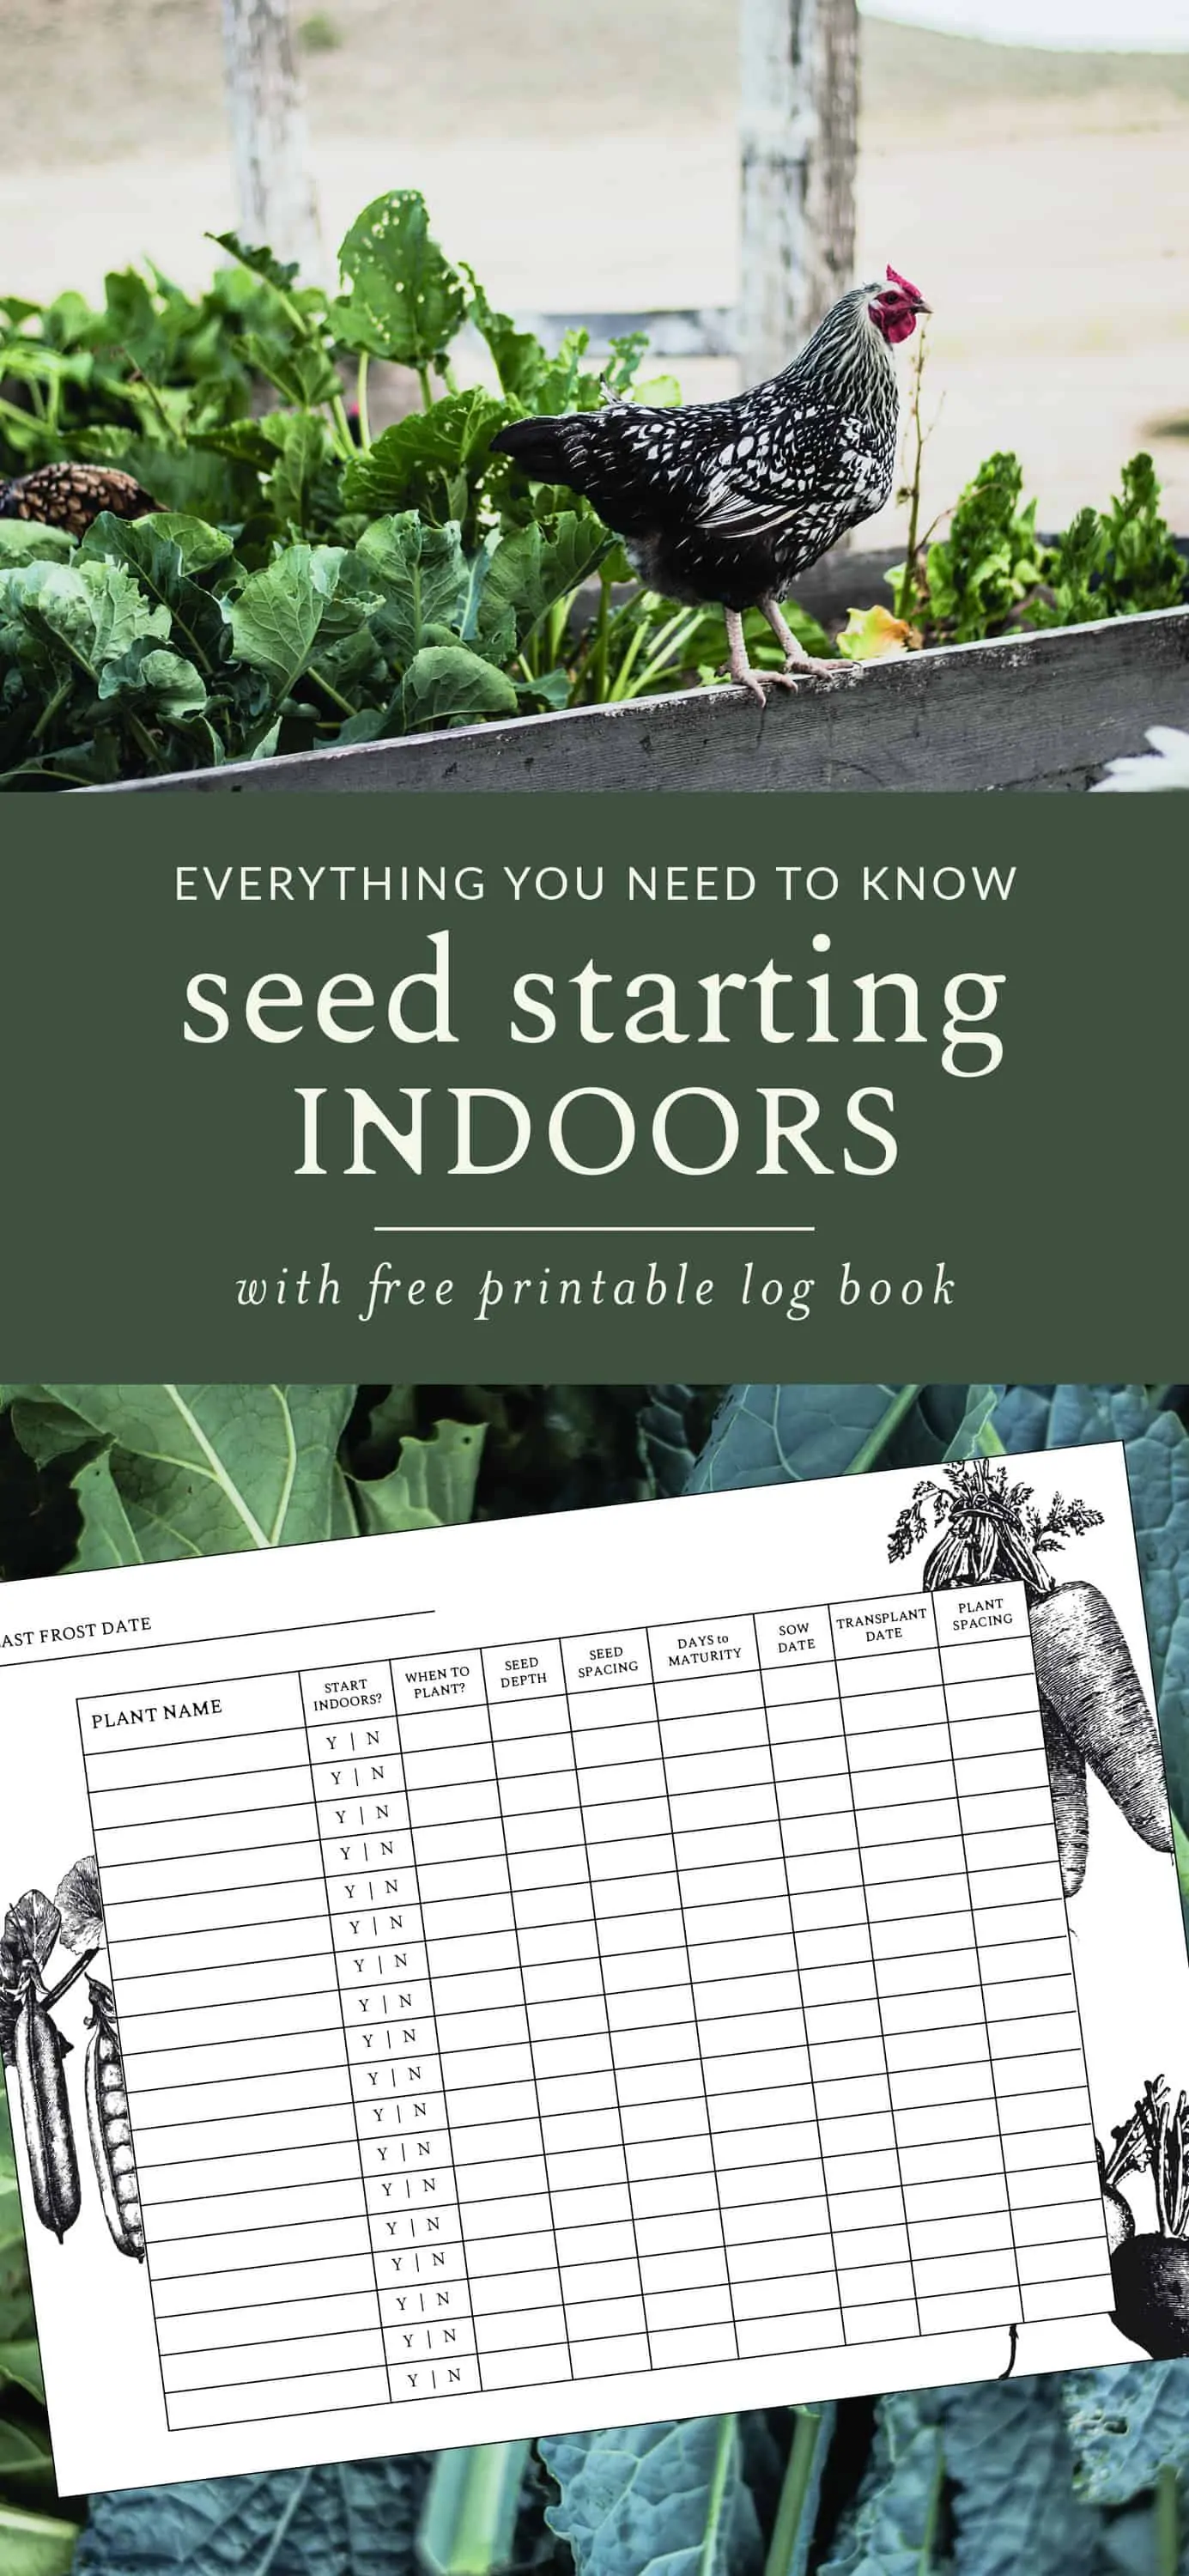 Live in a cooler climate with a limited growing season? Start your seeds indoors for an a jumpstart on your vegetable garden! Learn how to start seeds indoors in this easy to follow post, plus download my free printable seed starting log book!